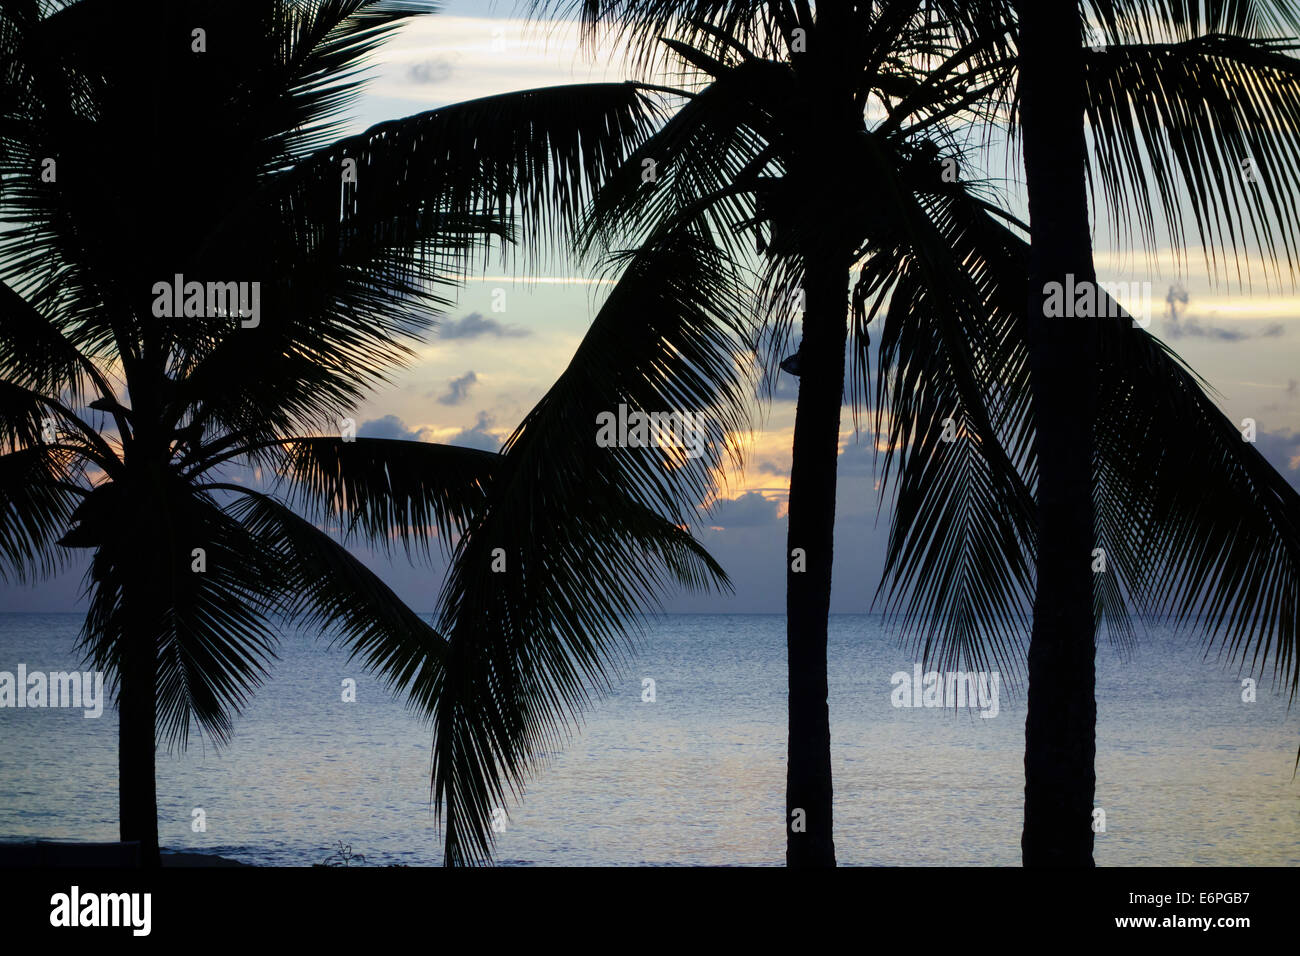 Coconut palms, Cocos nucifera, silhouetted against the Caribbean sea at dusk. Stock Photo